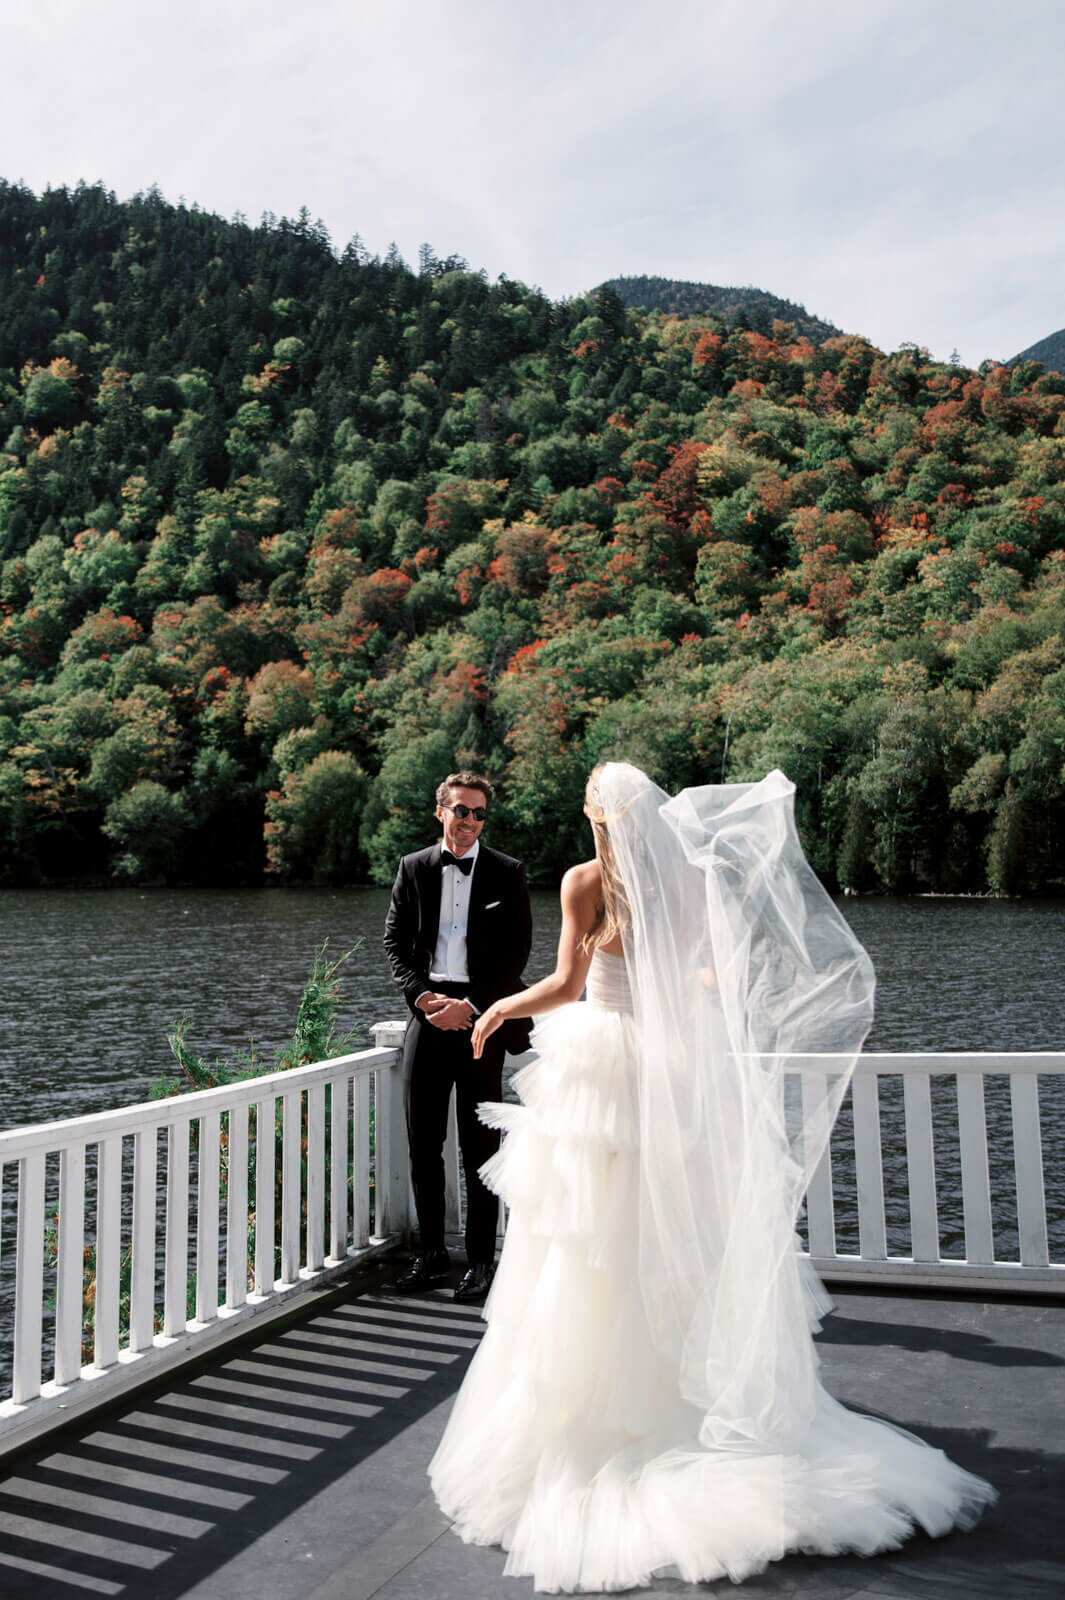 The groom and the bride are facing each other, standing on a terrace, overlooking waters and mountains, at The Ausable Club.